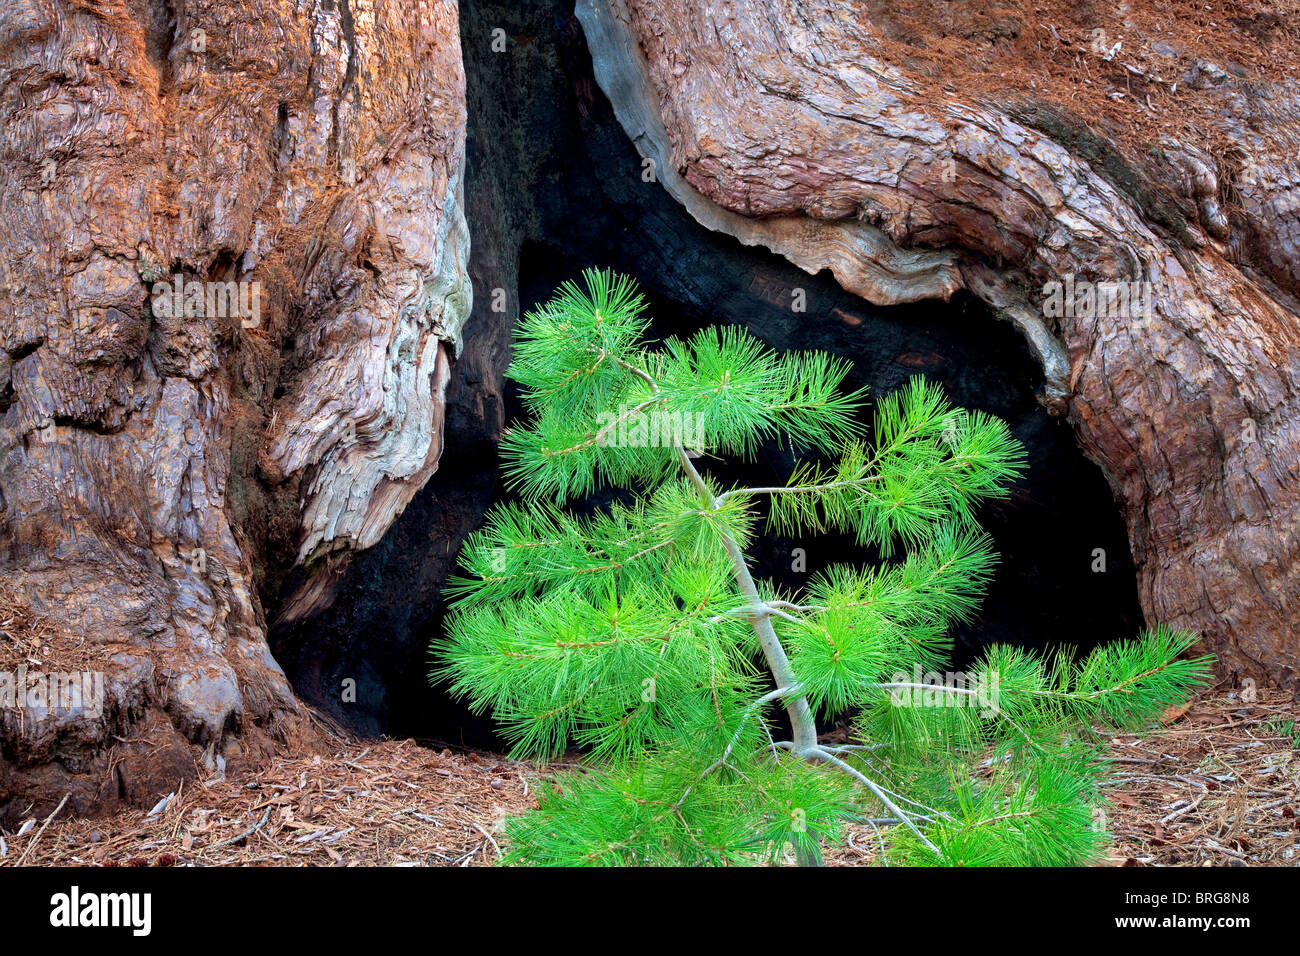 Pine tree and burned out portion of a Giant Sequoia (Sequoiadendron giganteum). Mariposa Grove. Yosemite National Park, Californ Stock Photo